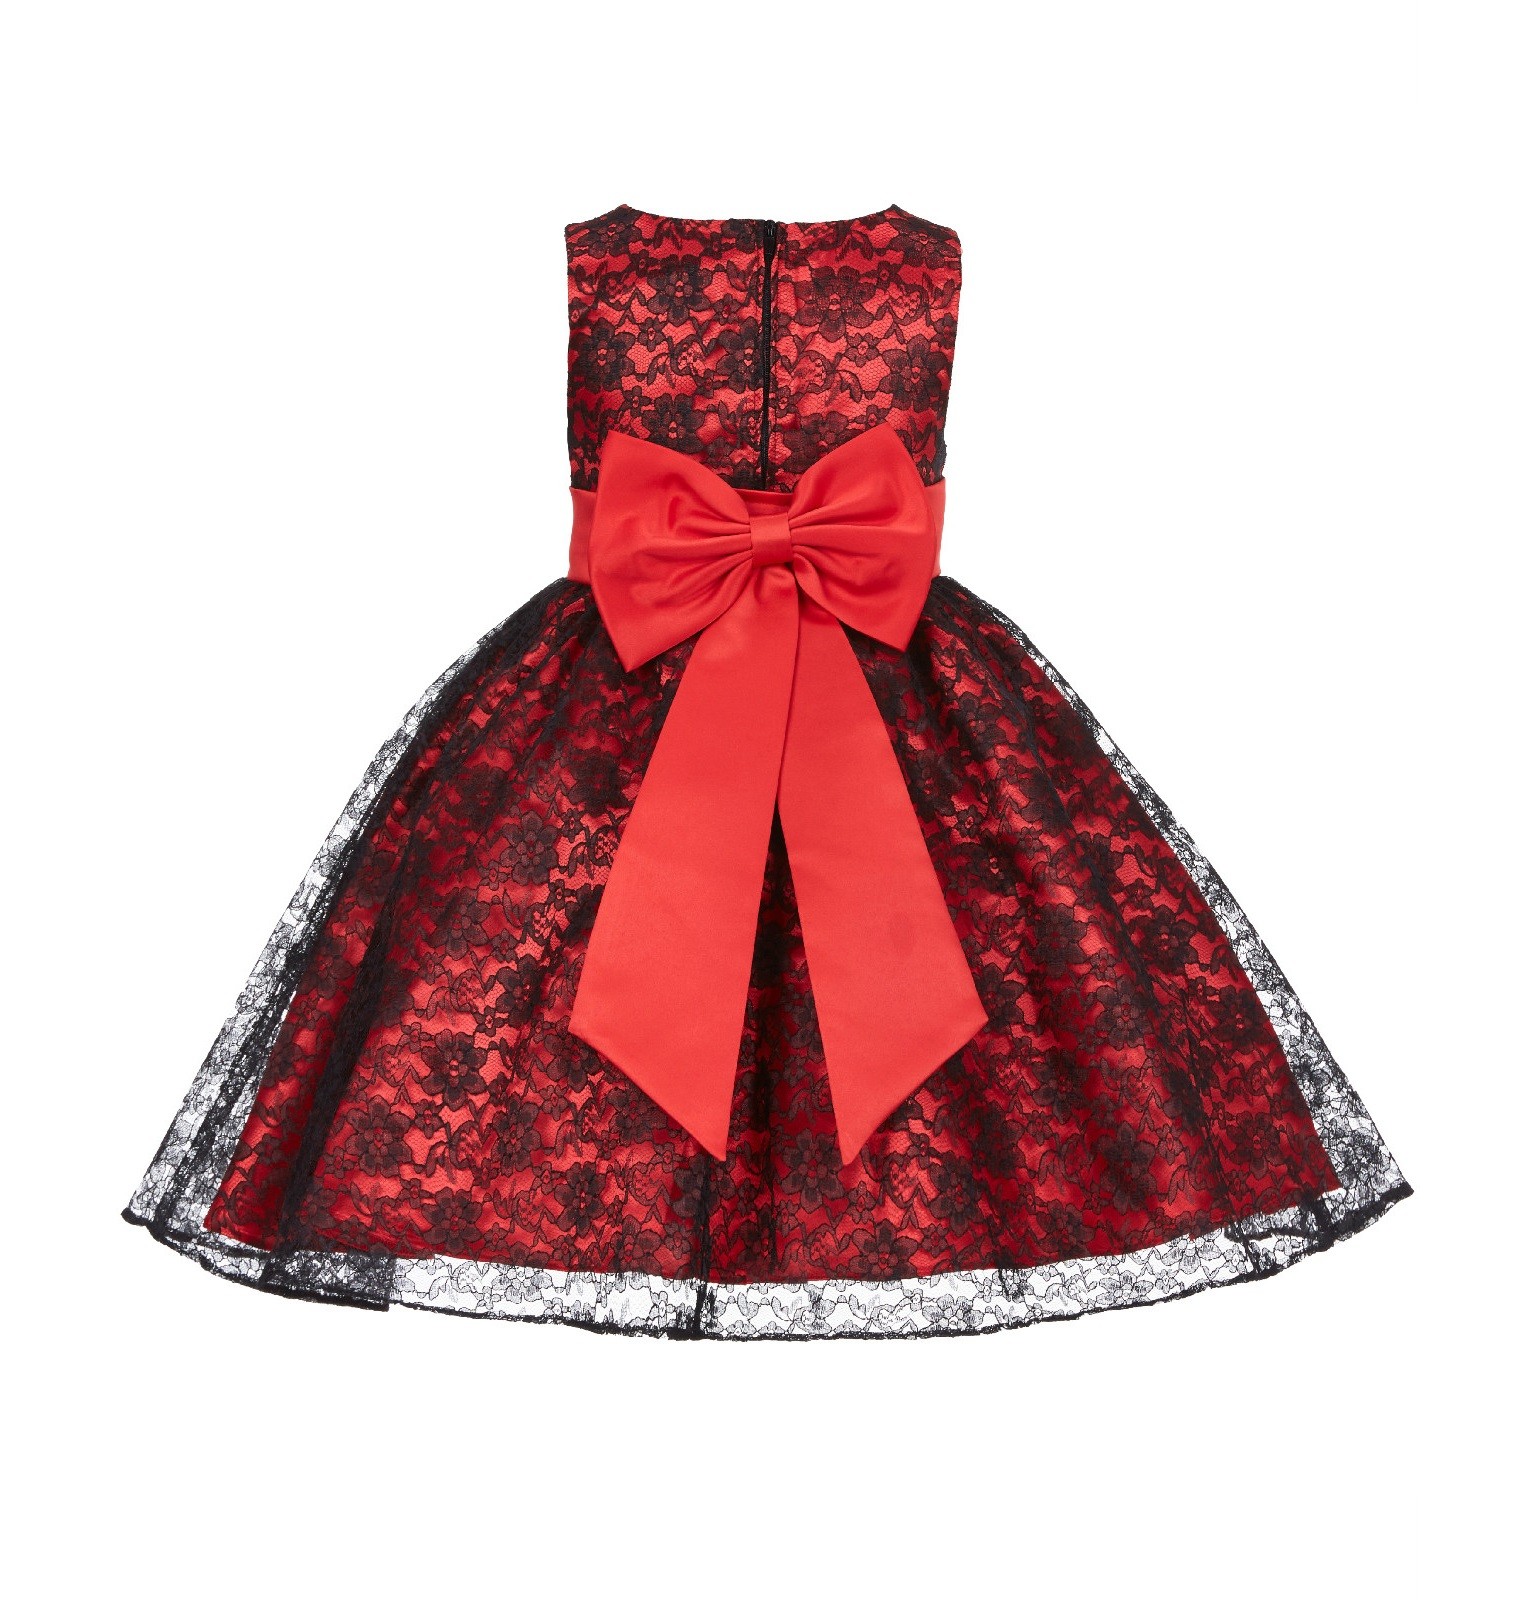 Red/Black/Red Floral Lace Overlay Flower Girl Dress Elegant Beauty 163T